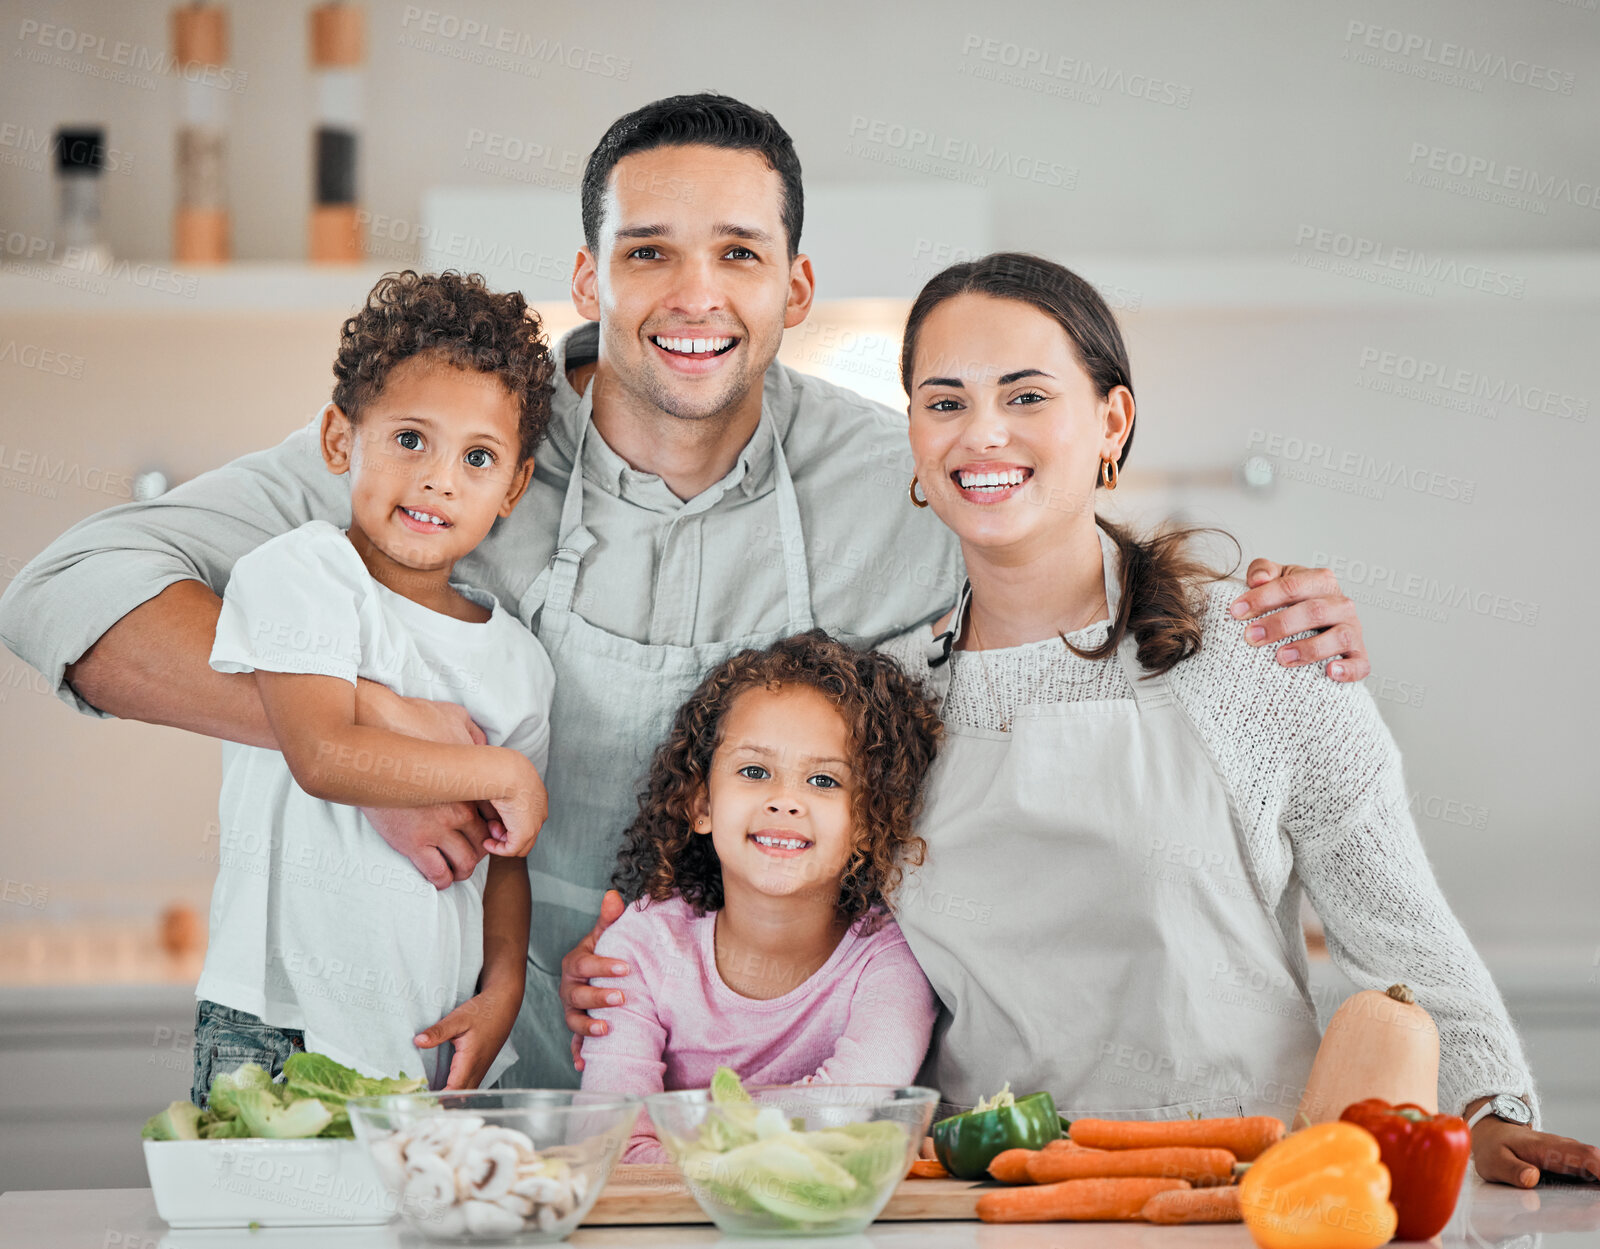 Buy stock photo Cooking, smile and portrait of family in kitchen for health, nutrition and food. Diet, vegetables and dinner with parents and children with meal prep at home for wellness, organic salad and learning